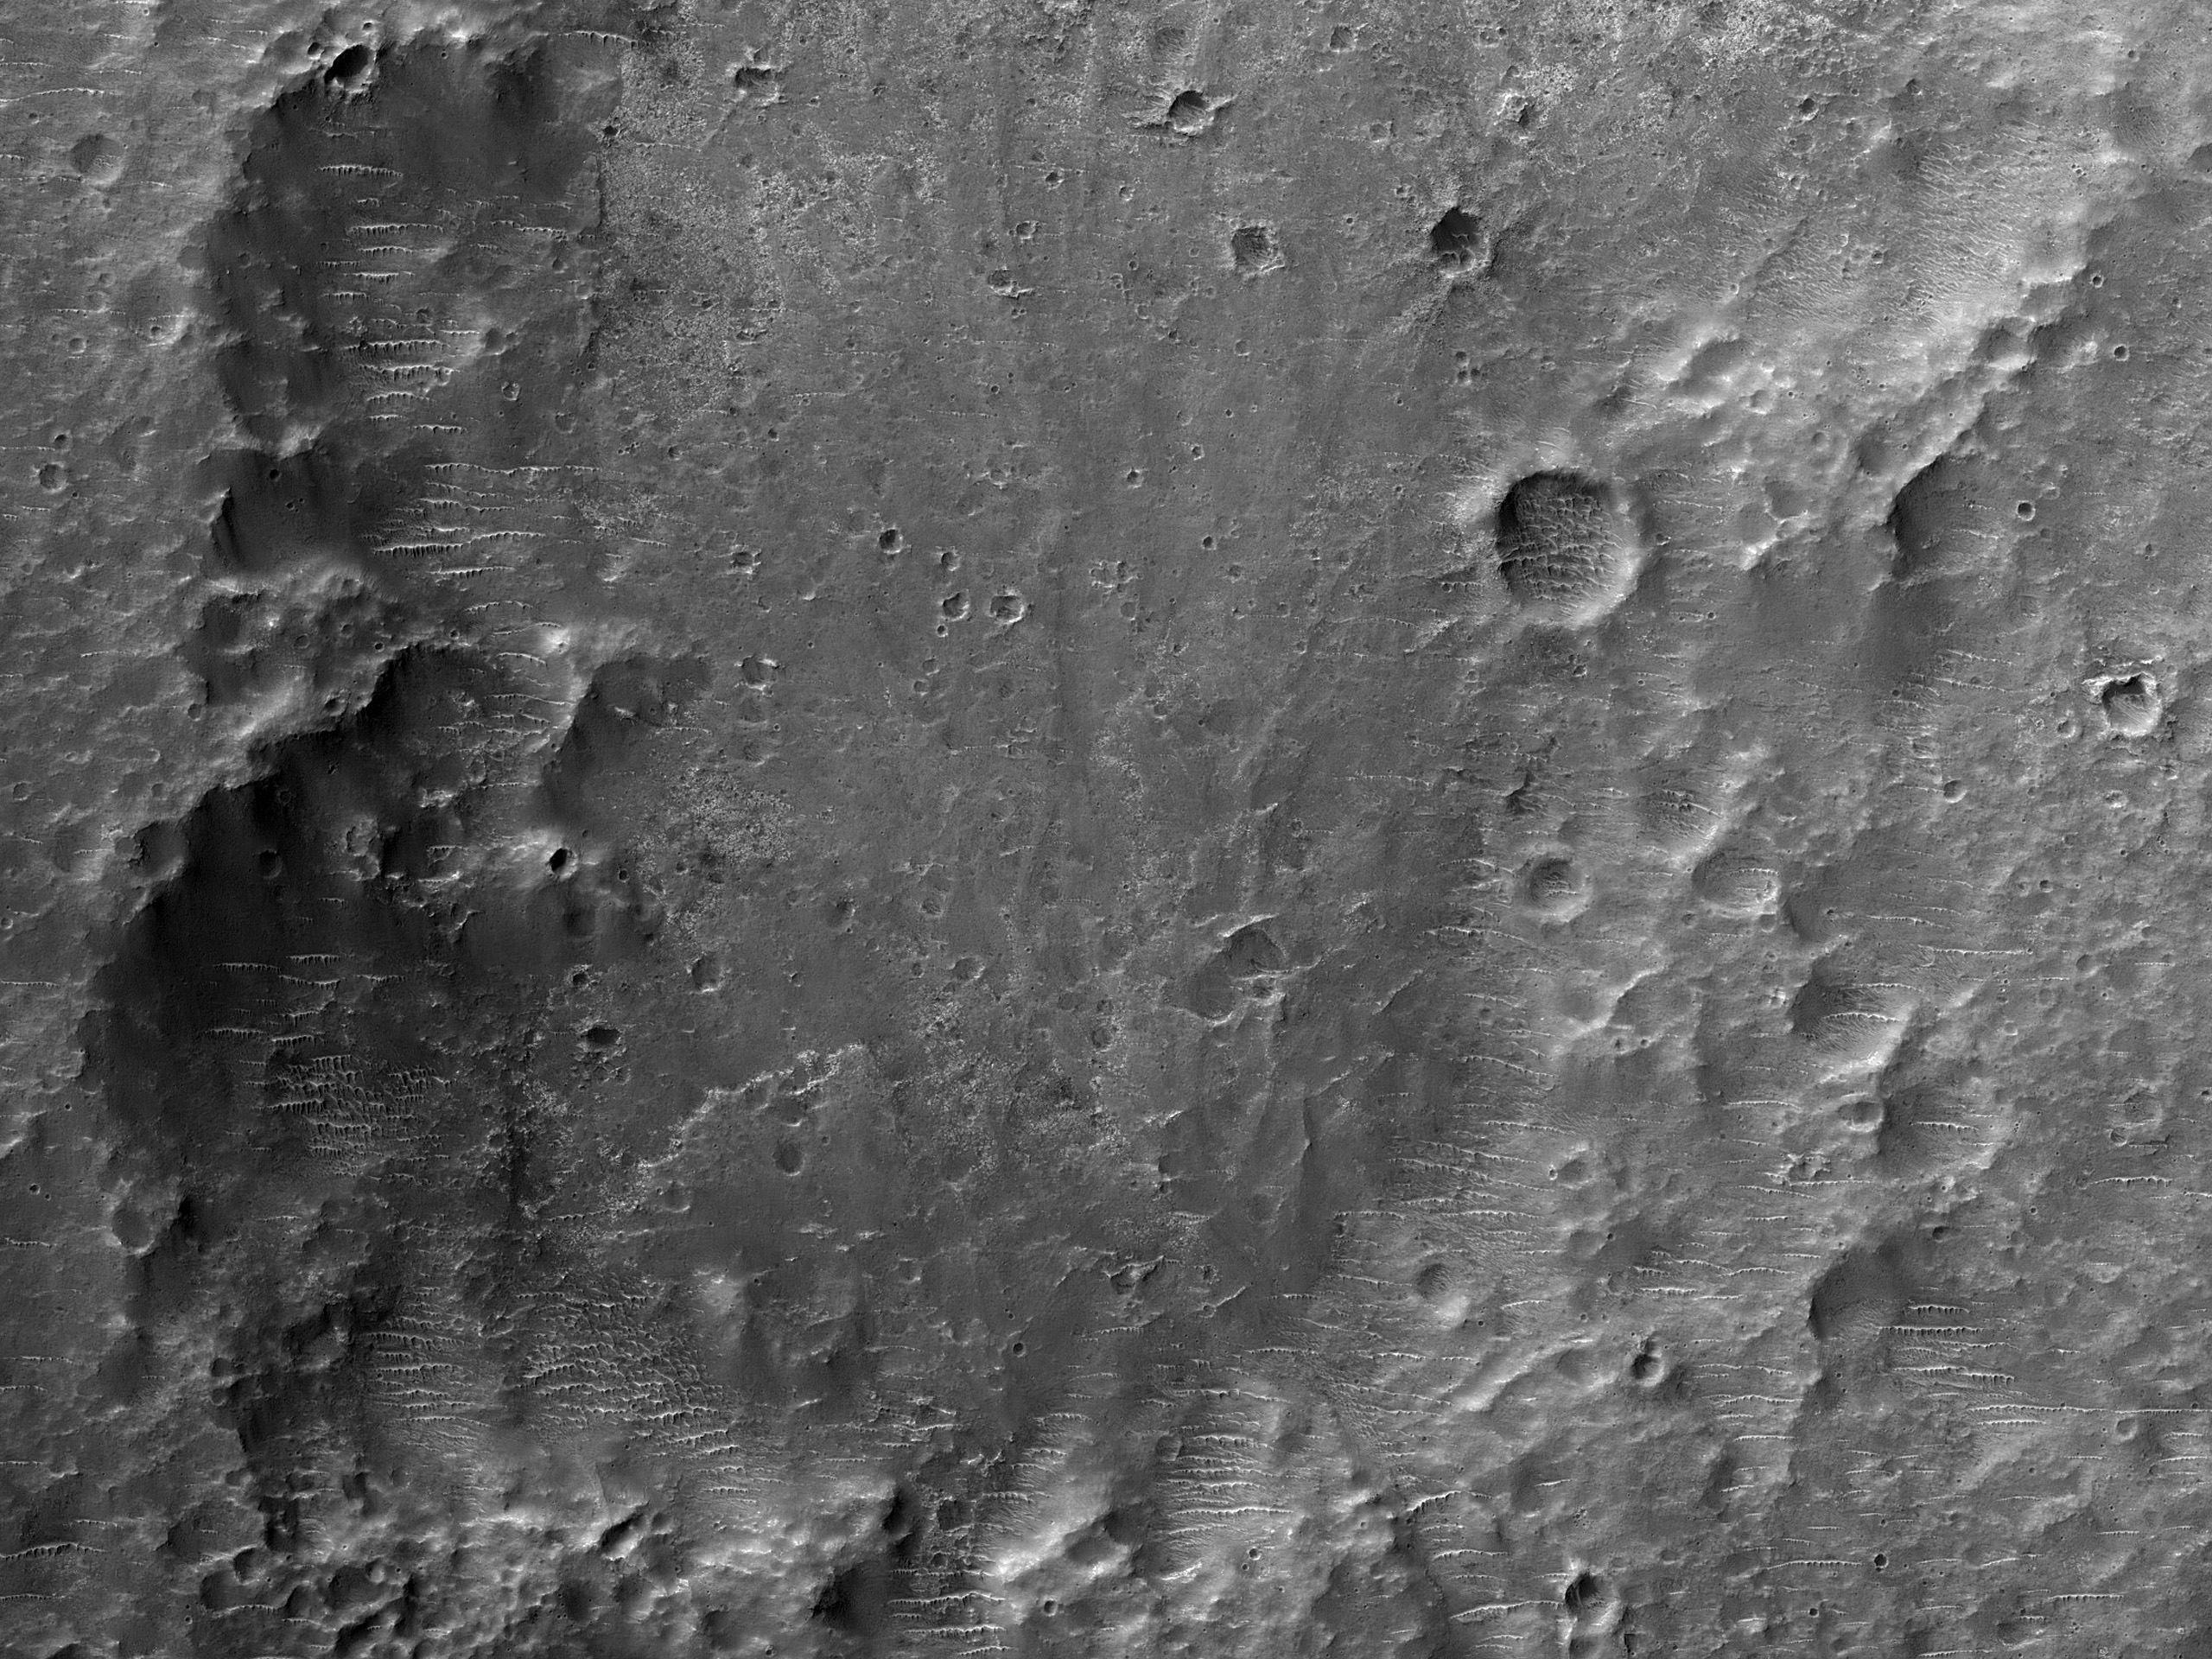 Fan Material in a Small Crater